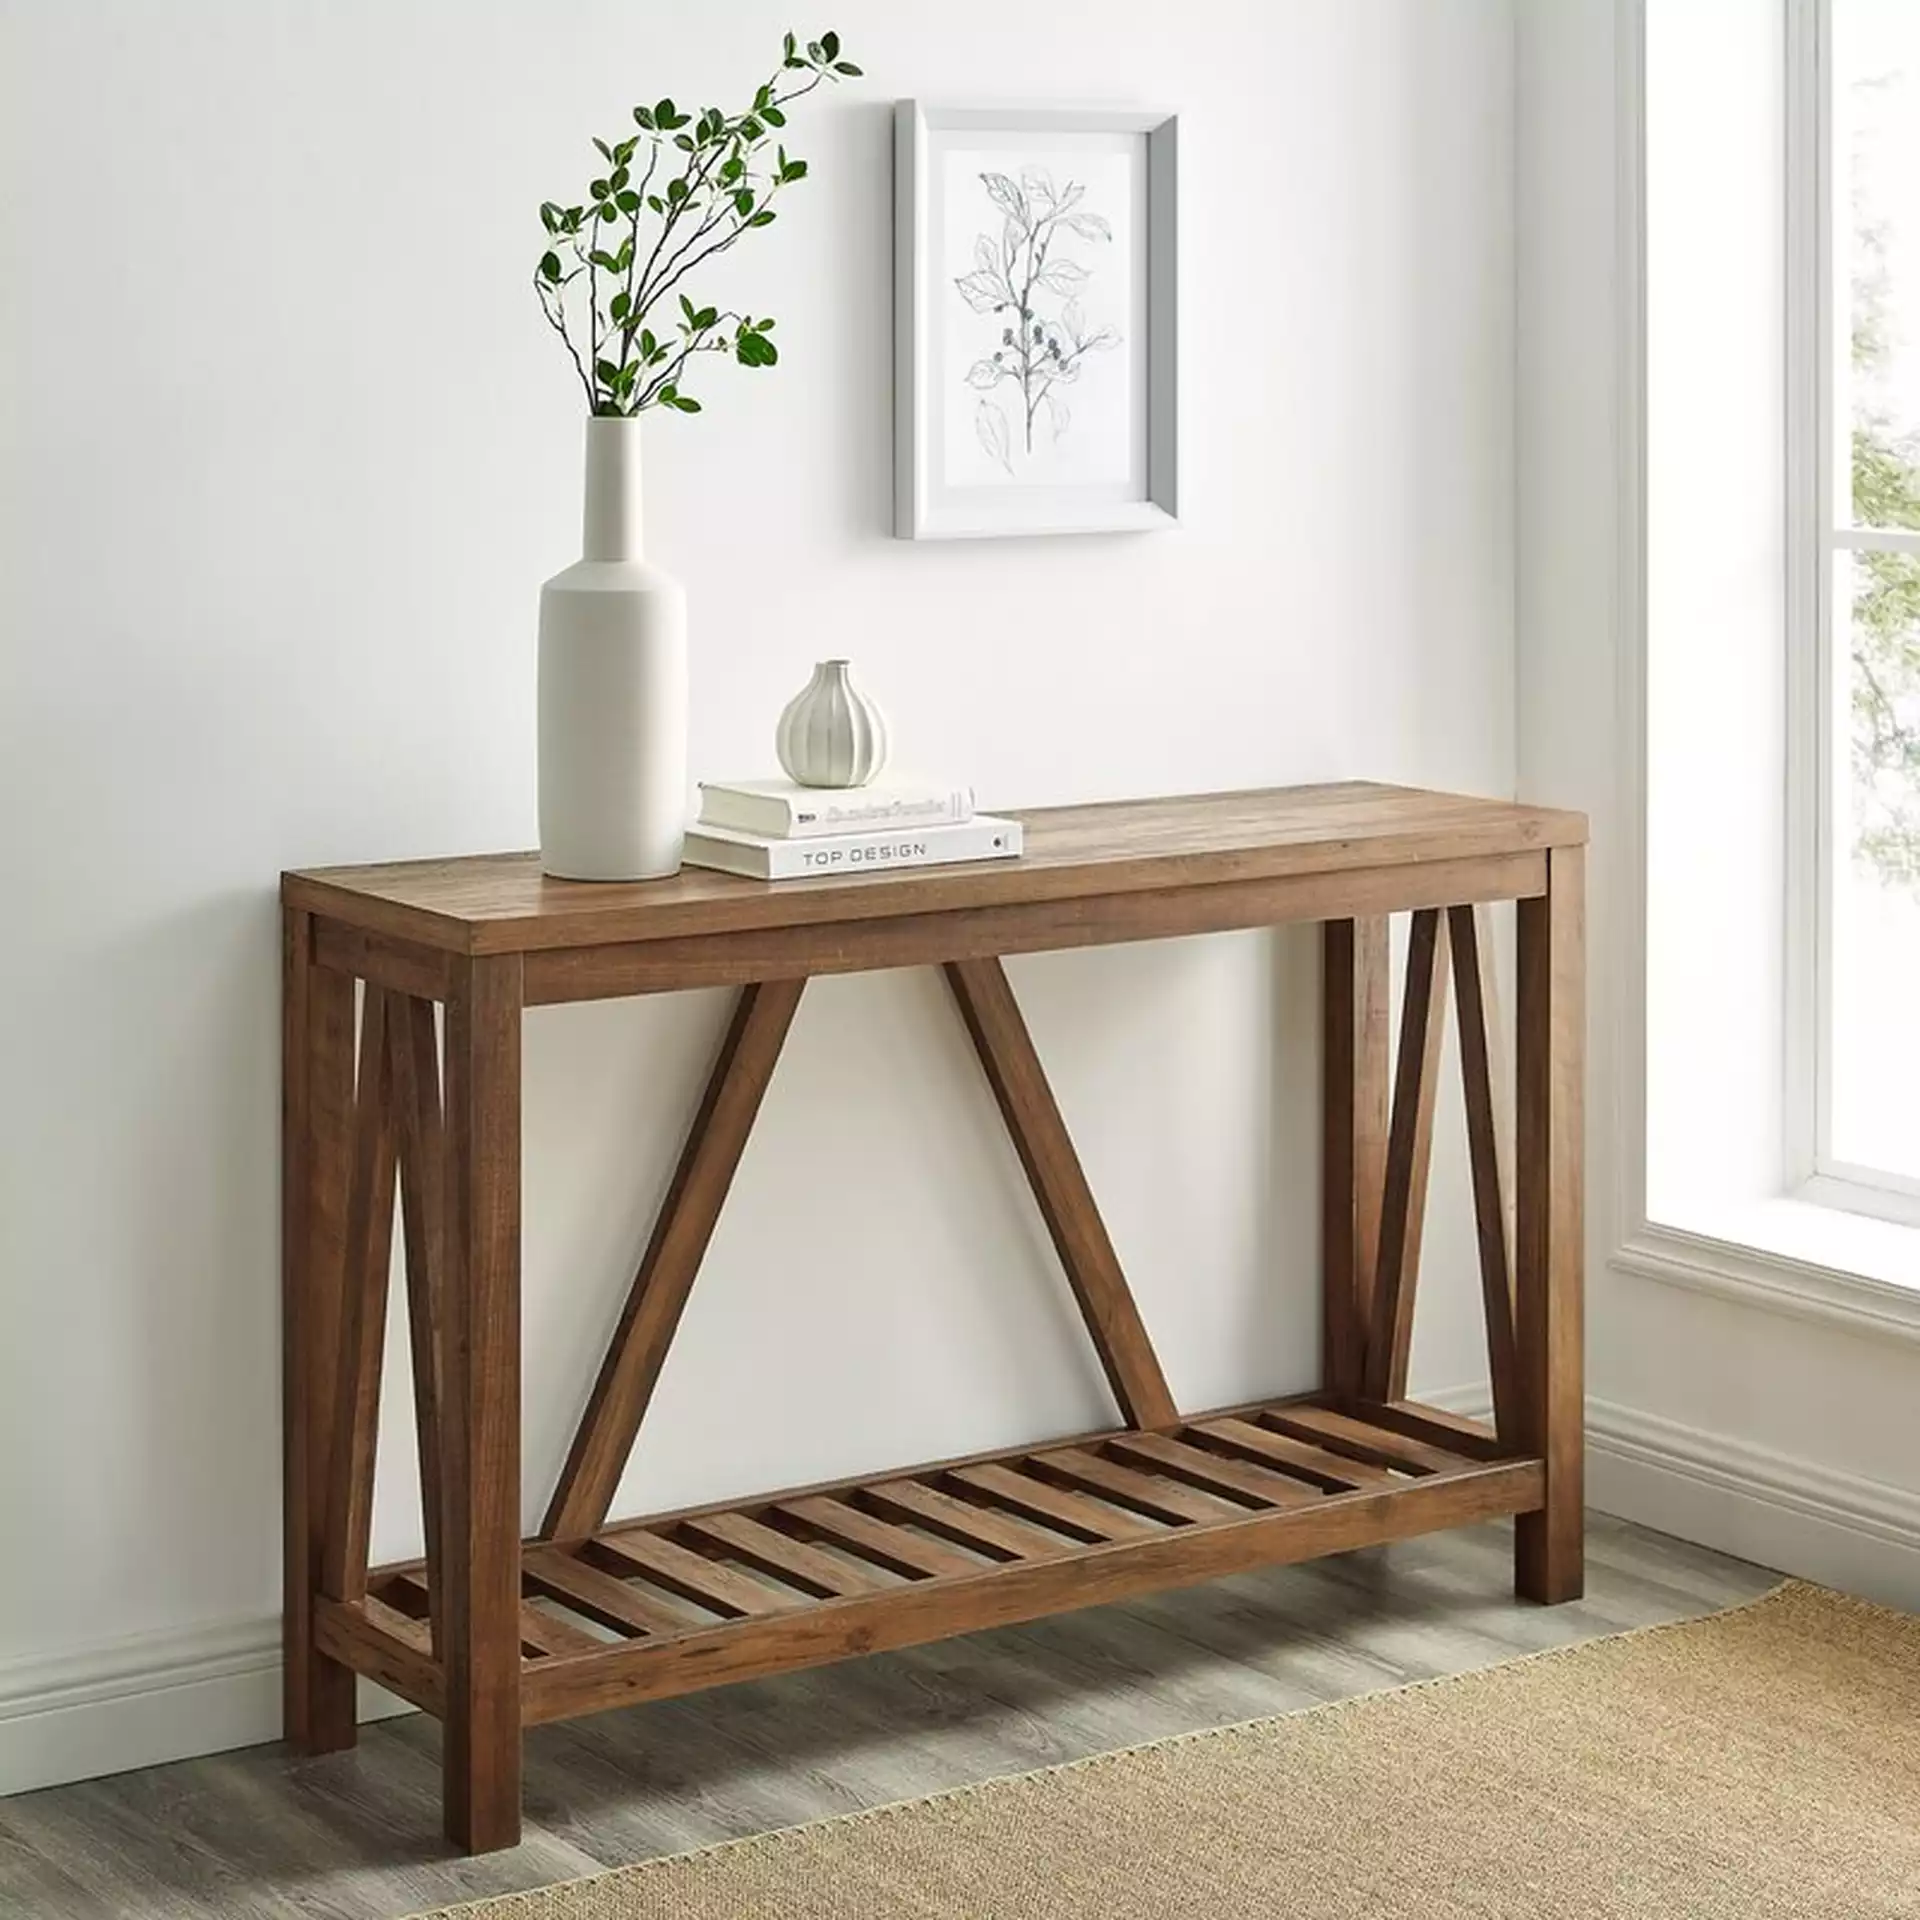 Offerman Console Table, Reclaimed Barnwood, 52"